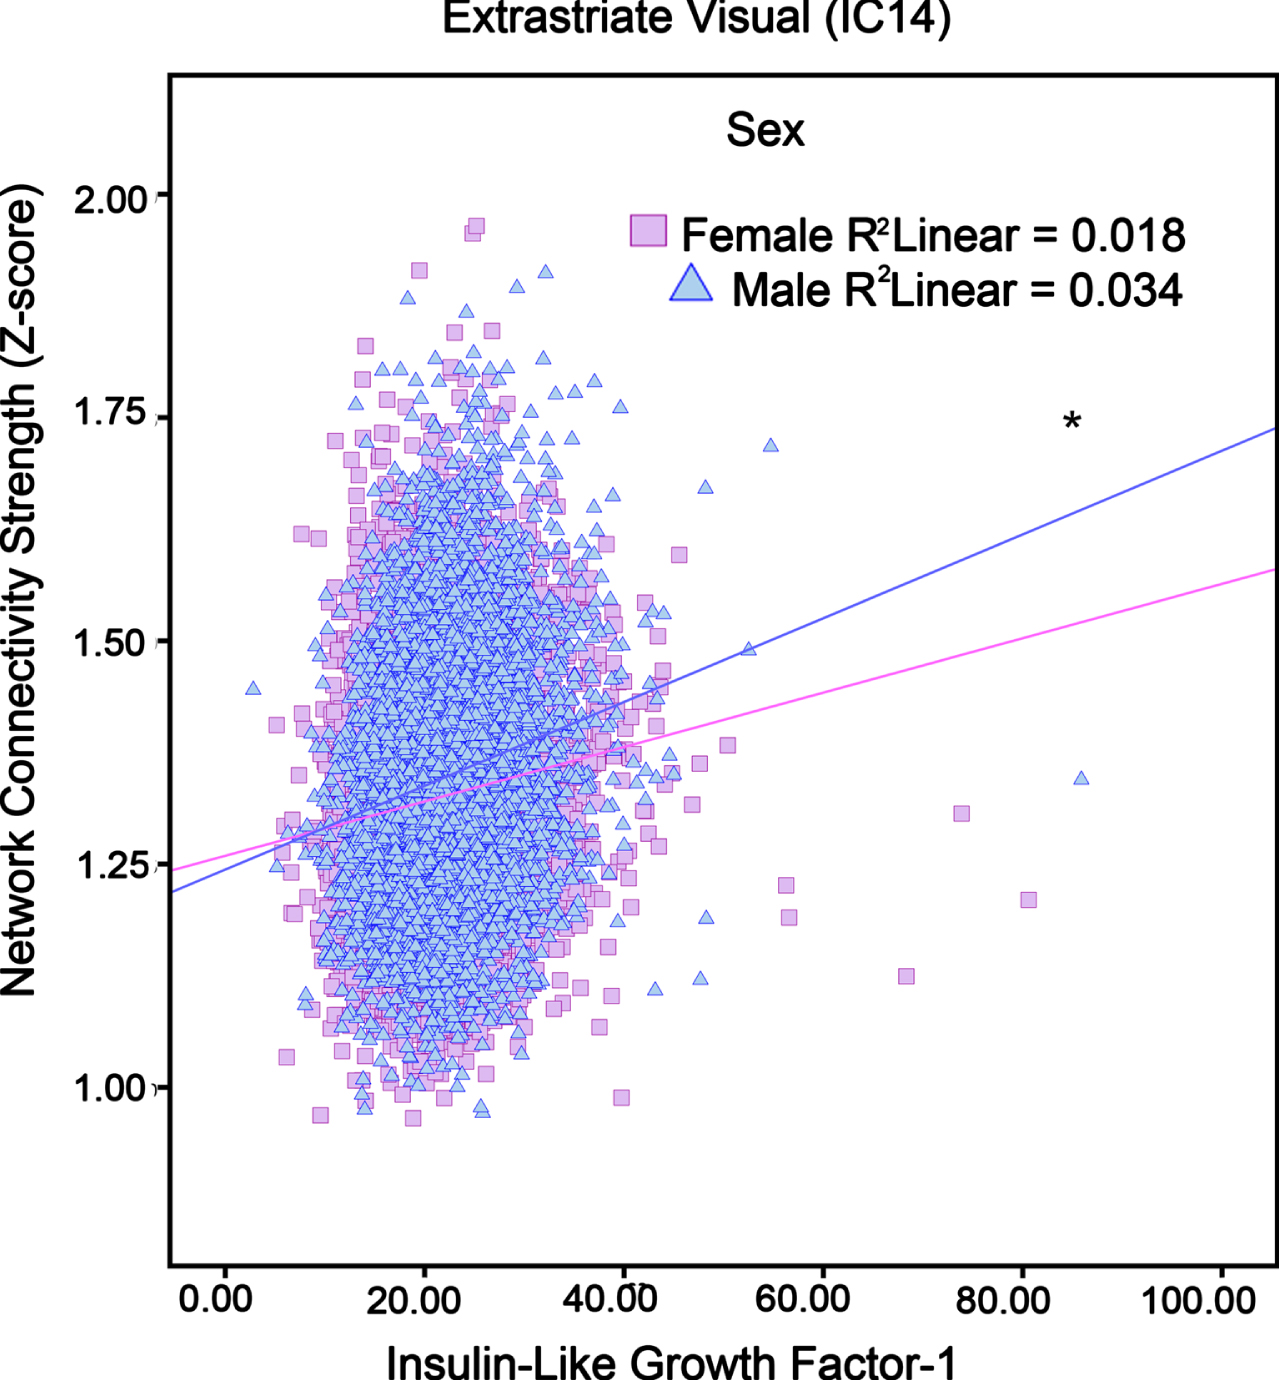 The association between IGF-1 levels and Fronto-Cingular network (i.e., neural network activity) in adults in different sex (“Female”, “Male”). Pink squares and blue triangles respectively represent Female and Male participants. *p < 0.05.